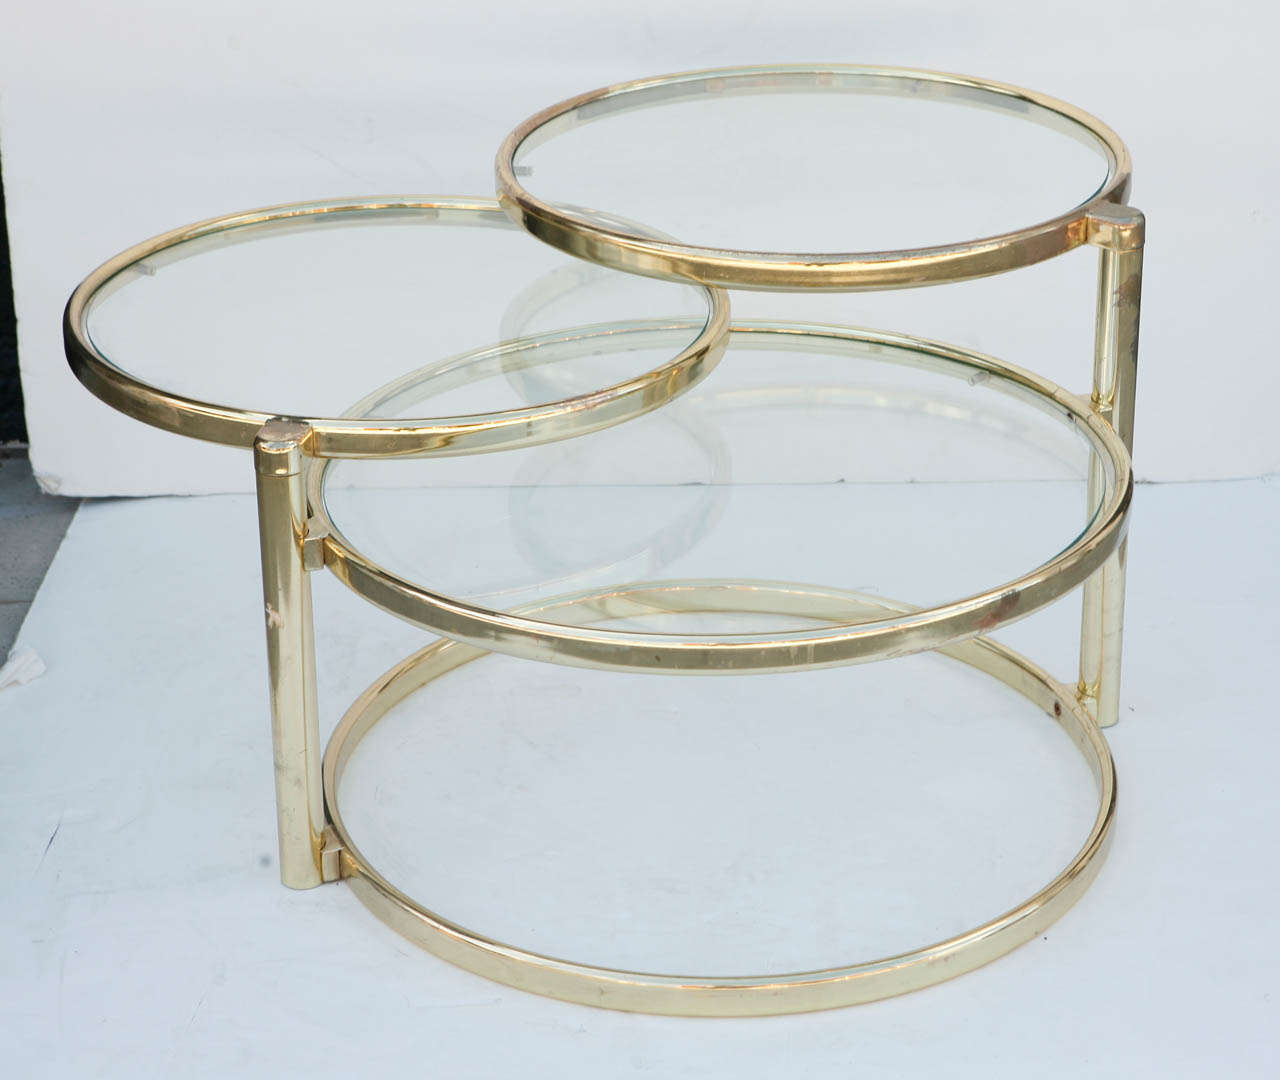 3 Tier 1970's brass and glass swivel coffee table.  Both top tier and middle tier swivel out to expand the length of the table to 65